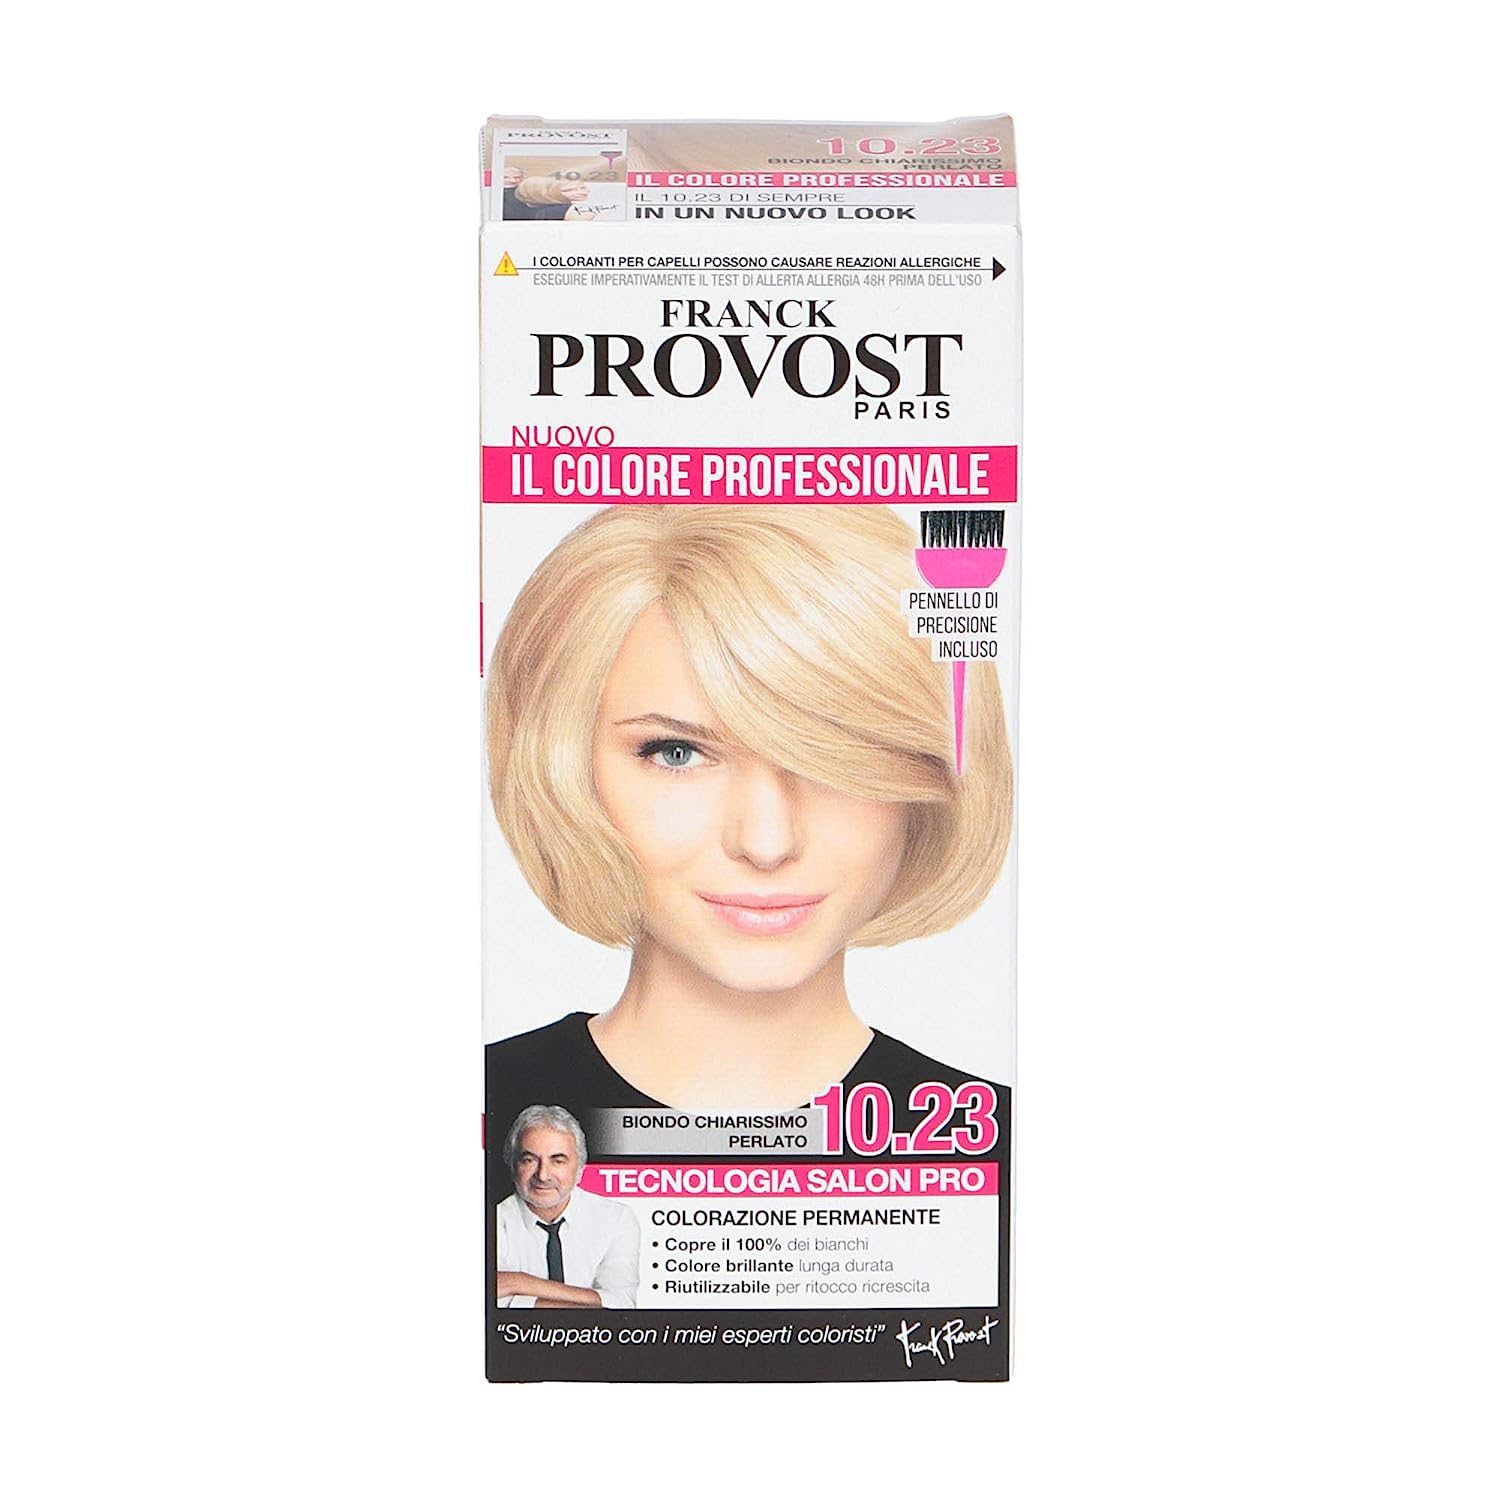 Franck Provost Professional Hair Color, Domzilium Color, Enhancement of Reflections and Shine, Very Bright, Mother of Pearl Blonde